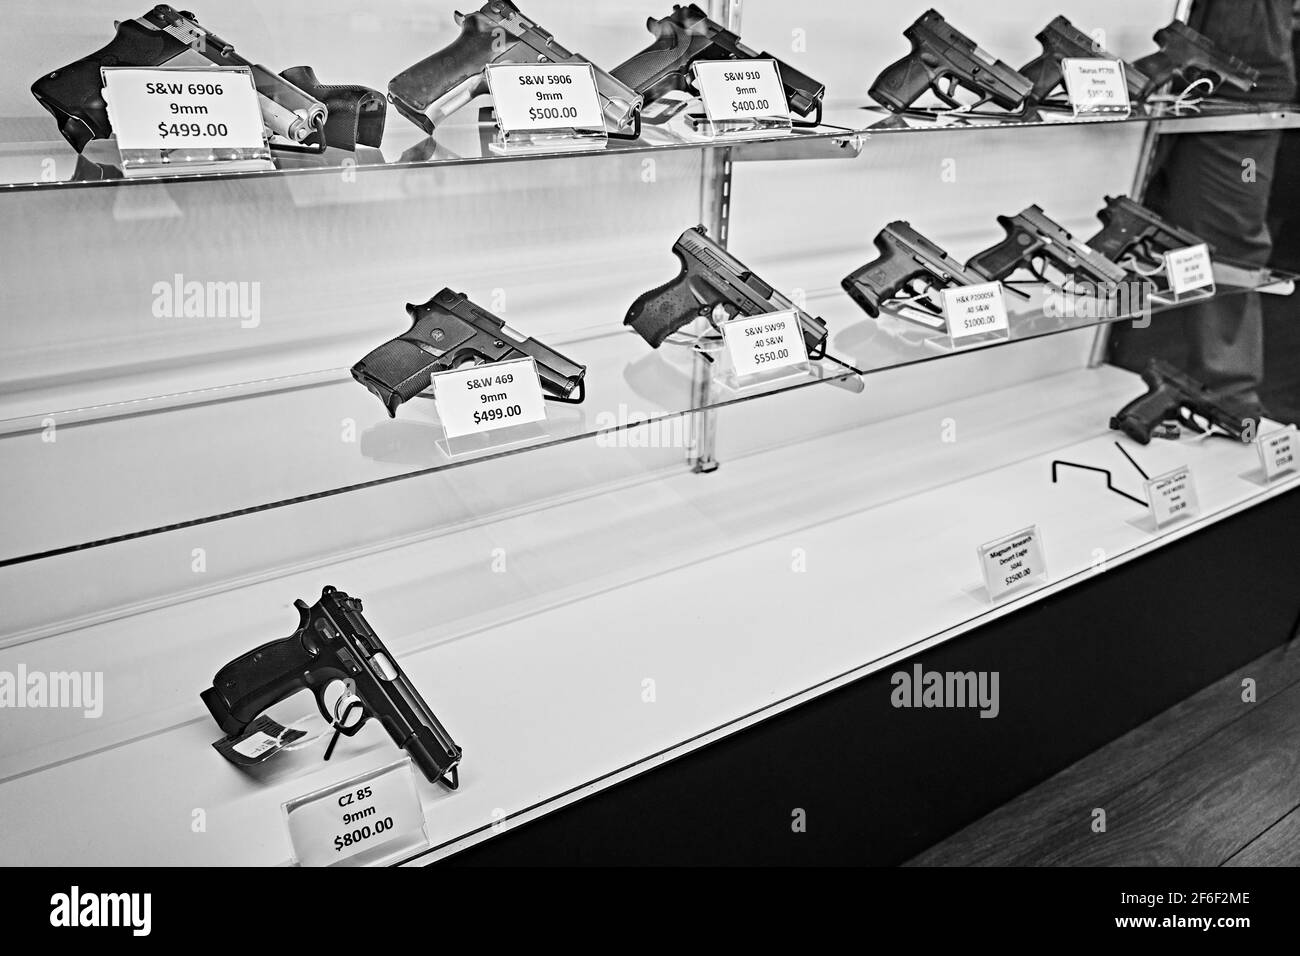 Handguns with labels and price tags on sale on shelves at gun store with many pistols already sold out. USA Stock Photo